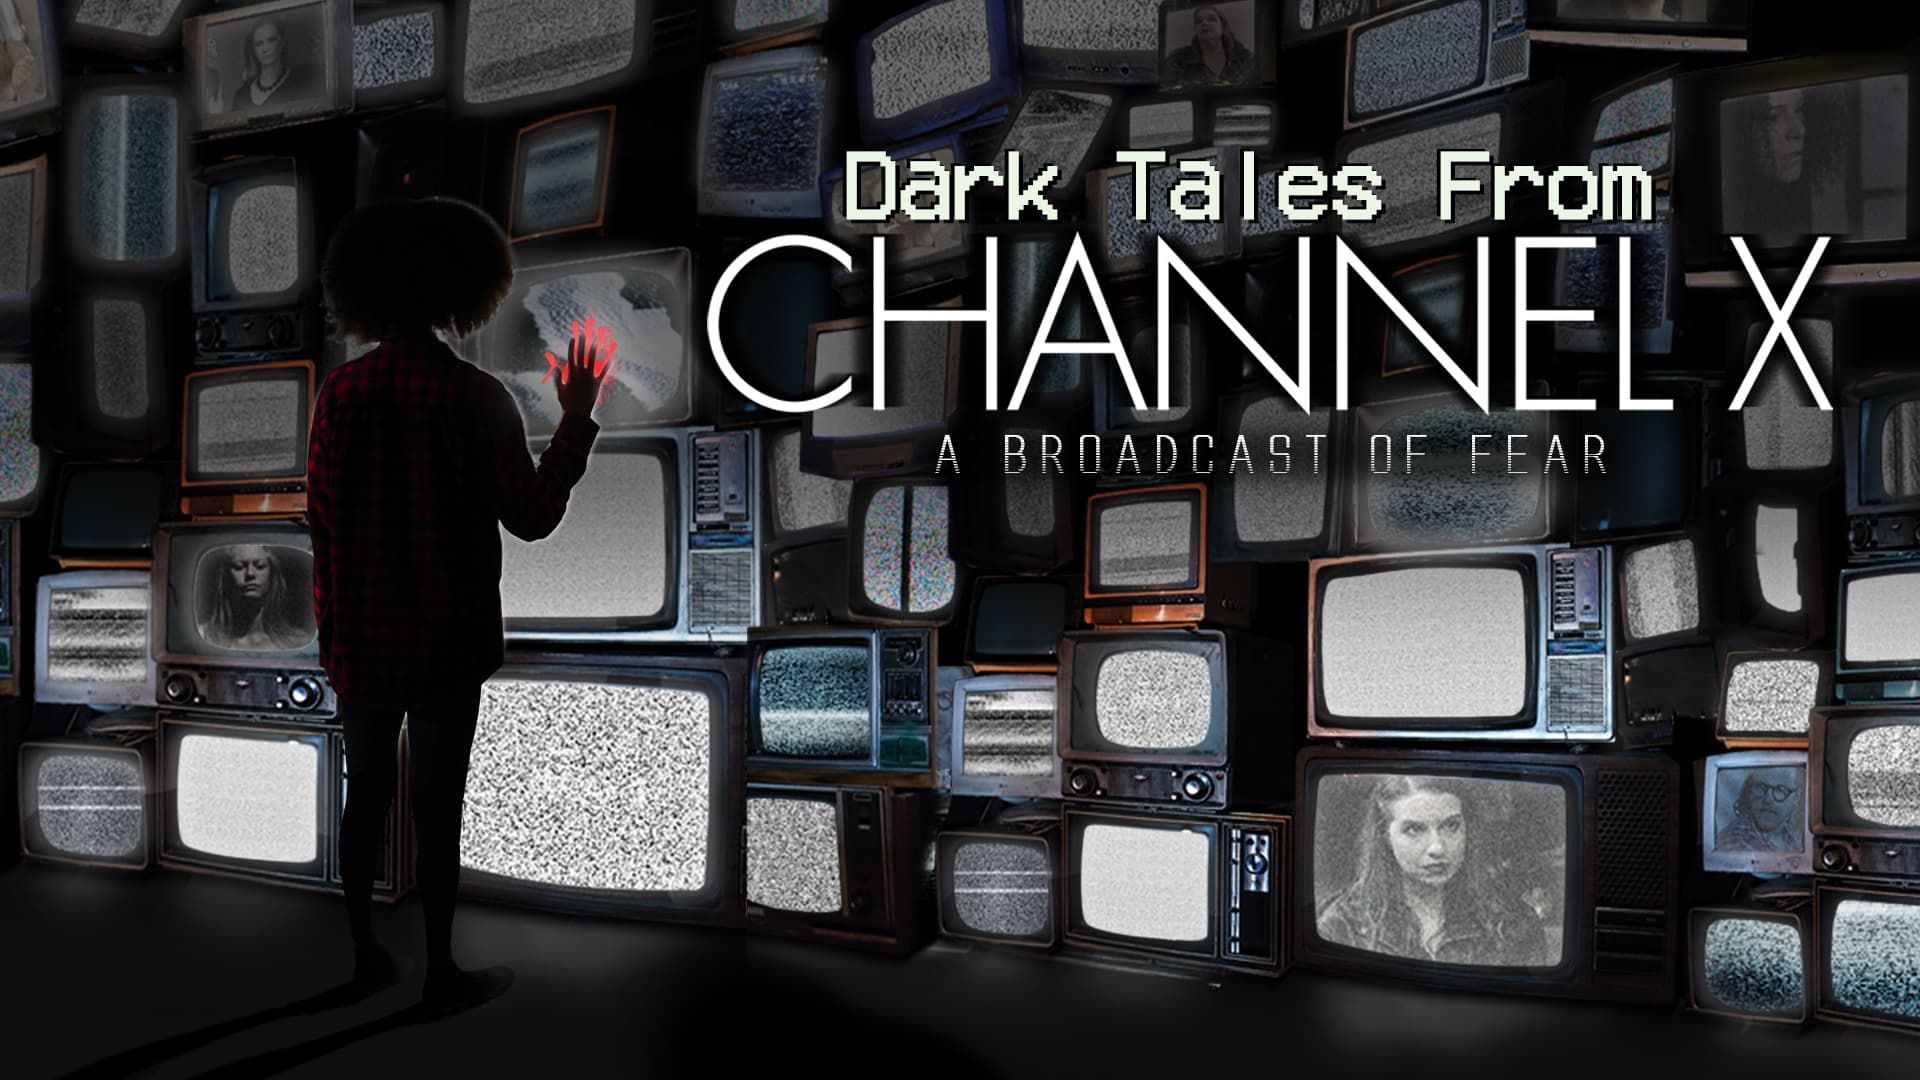 Dark Tales from Channel X background